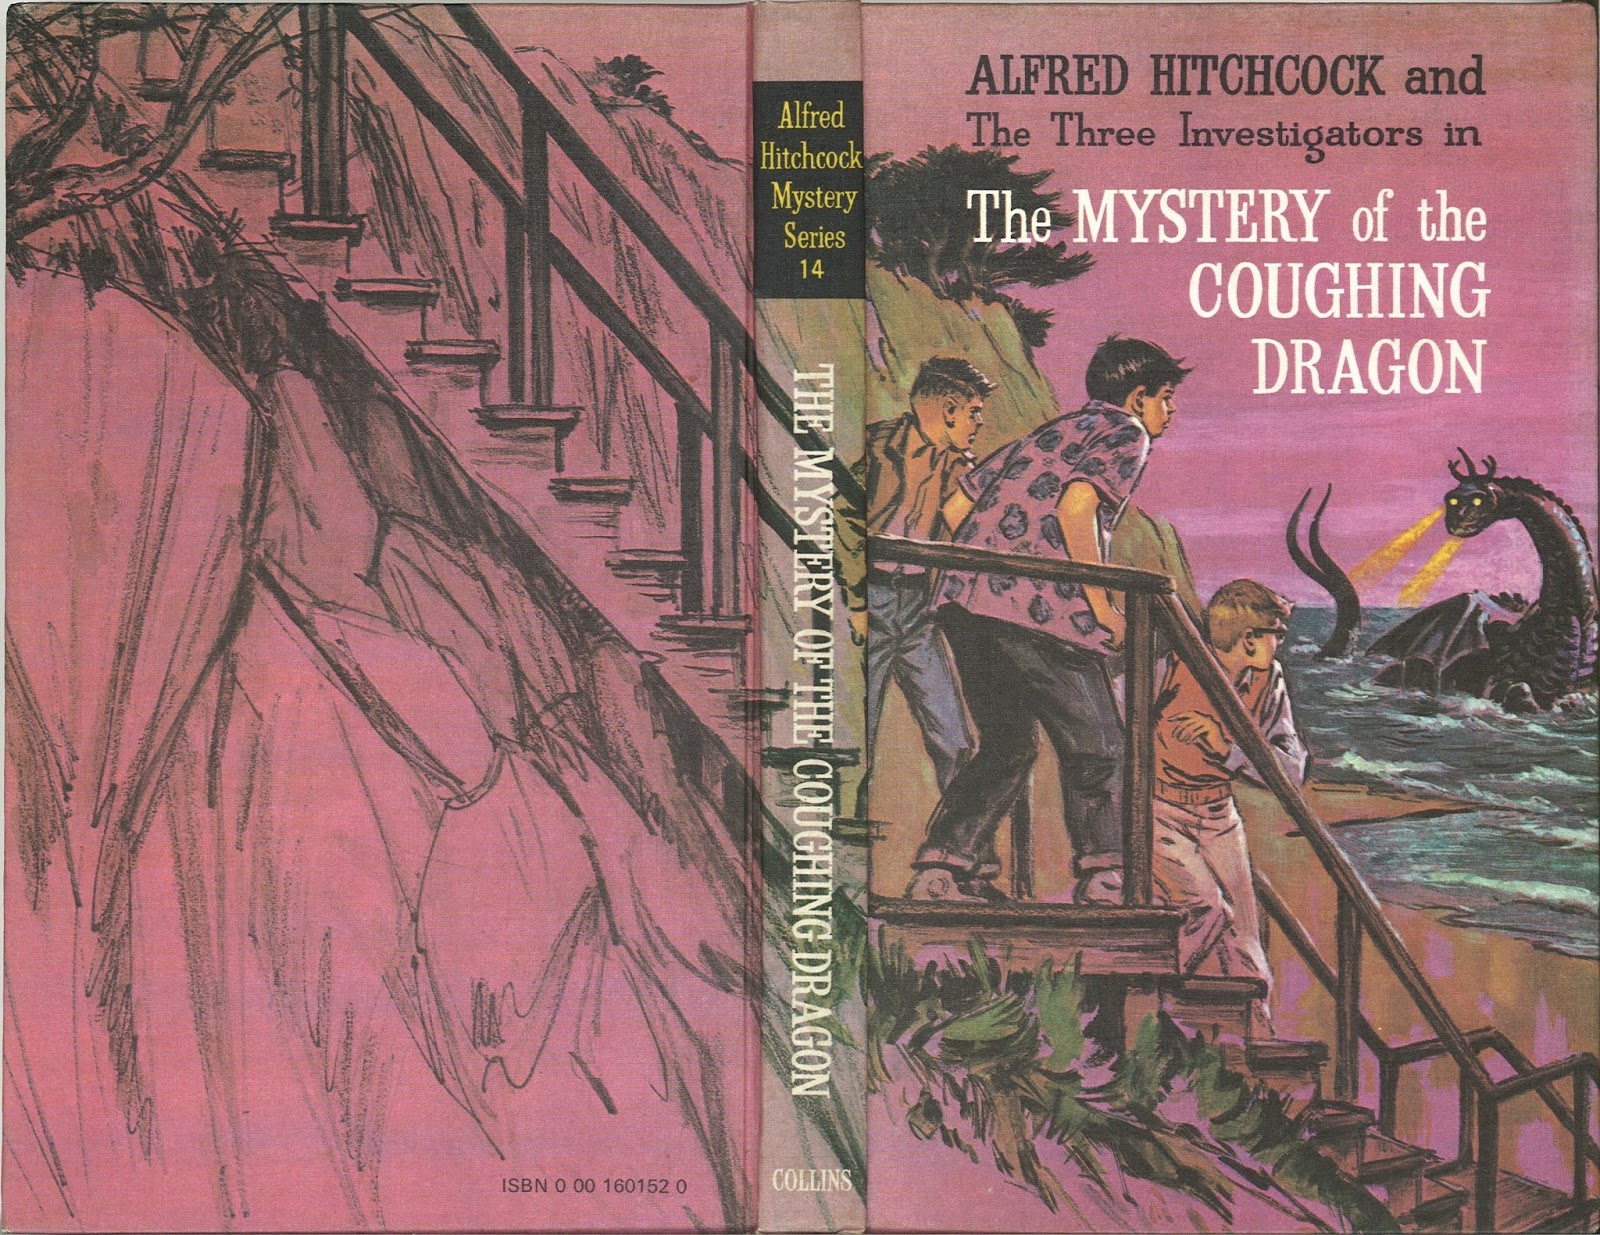 The Mystery of the Coughing Dragon wraparound cover art 2x3" fridge magnet T3I 